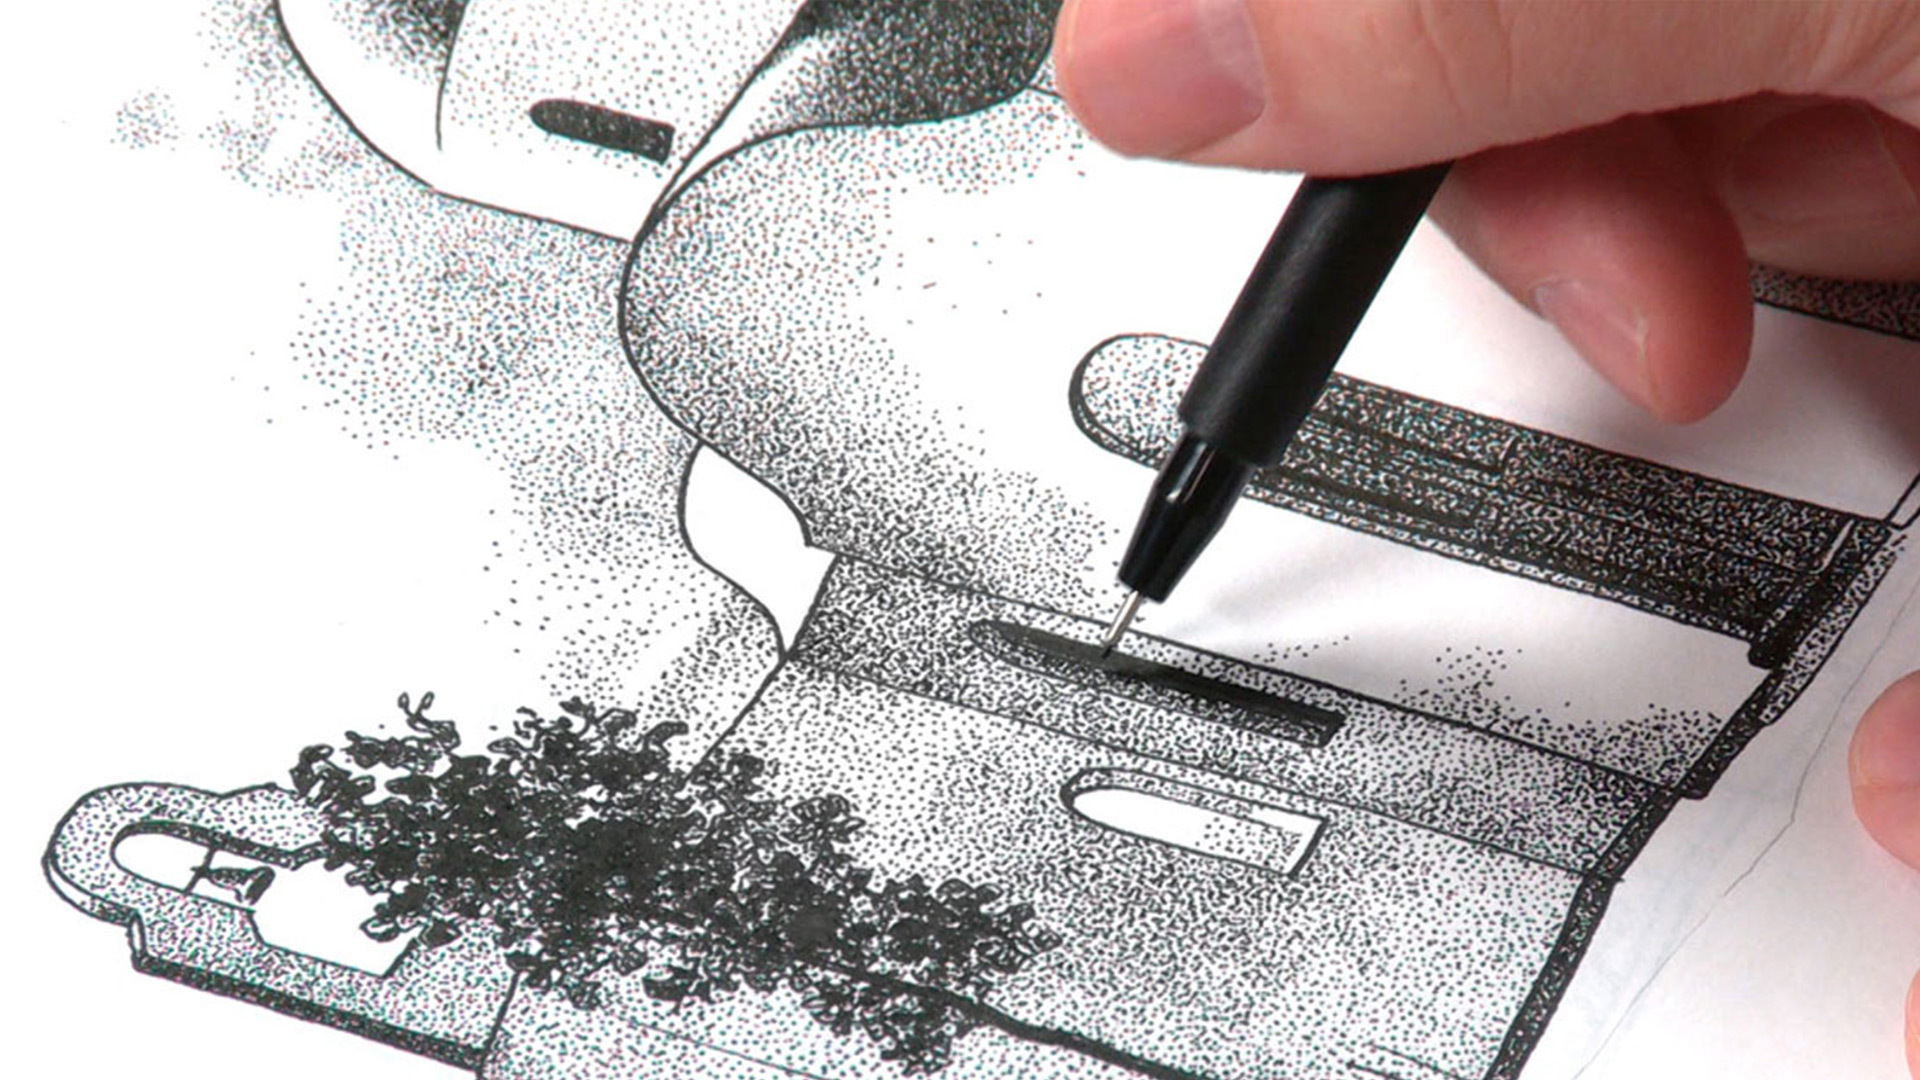 Pen and ink drawing - 6 reasons you should try it today!